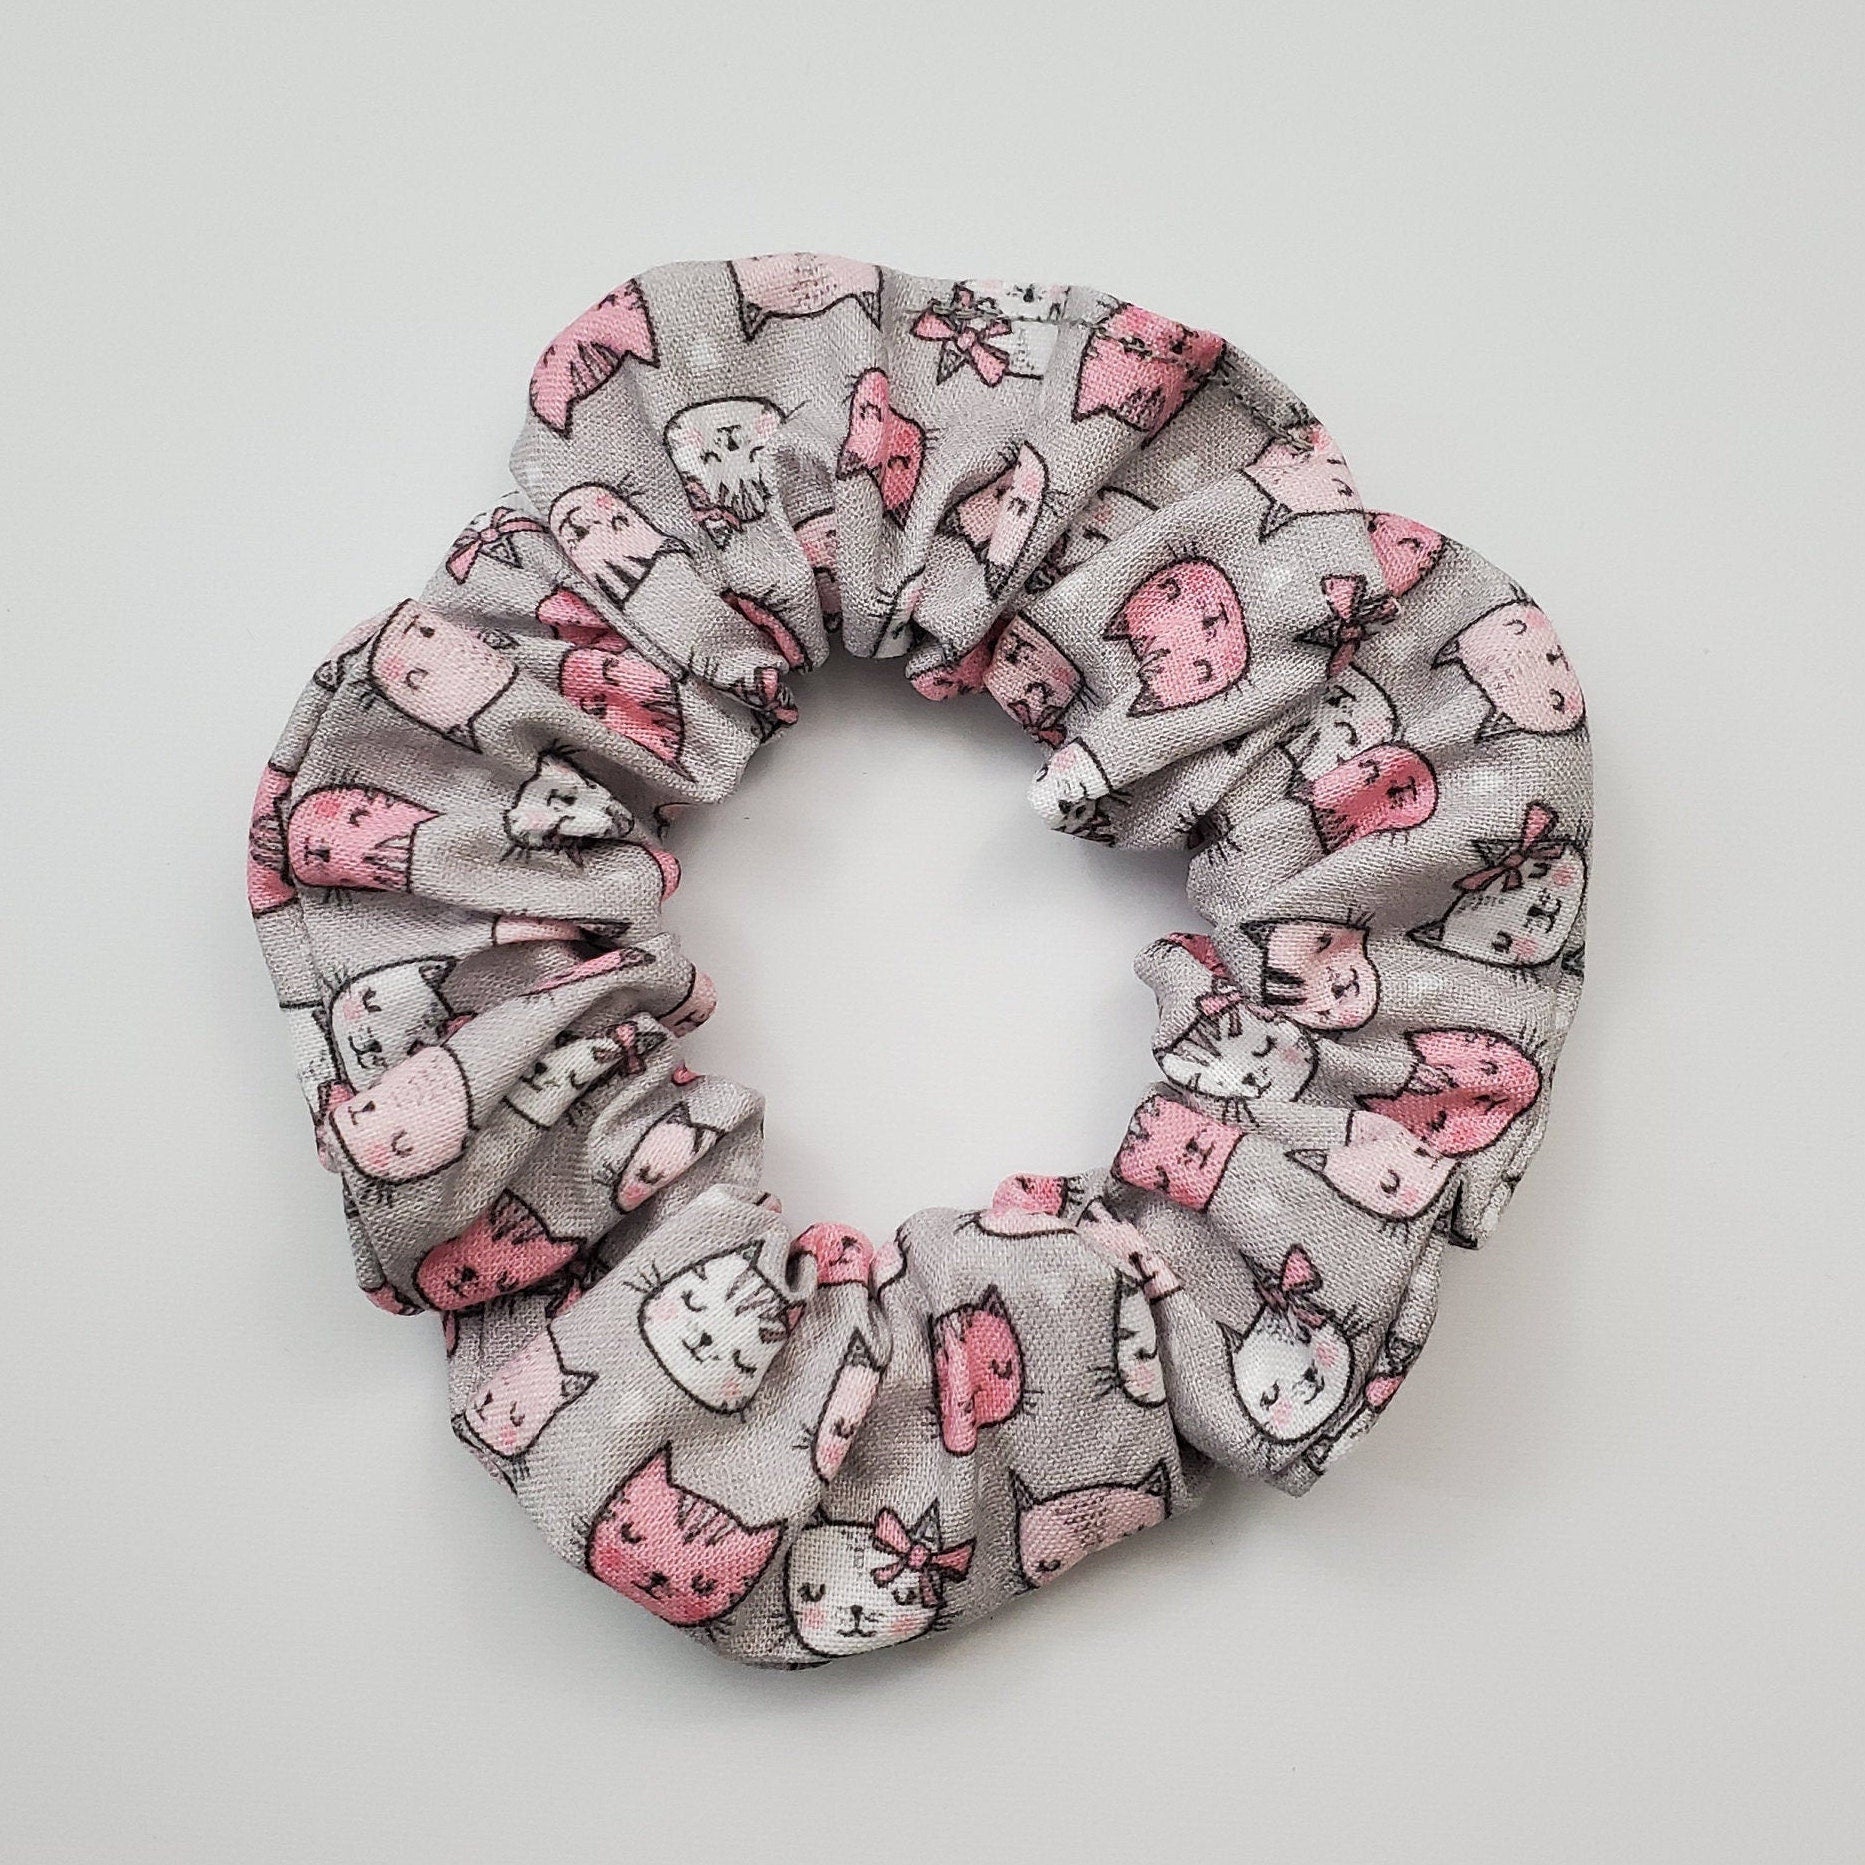 Grey and pink cats scrunchie - a grey background fabric with white and pink cartoon cat heads.